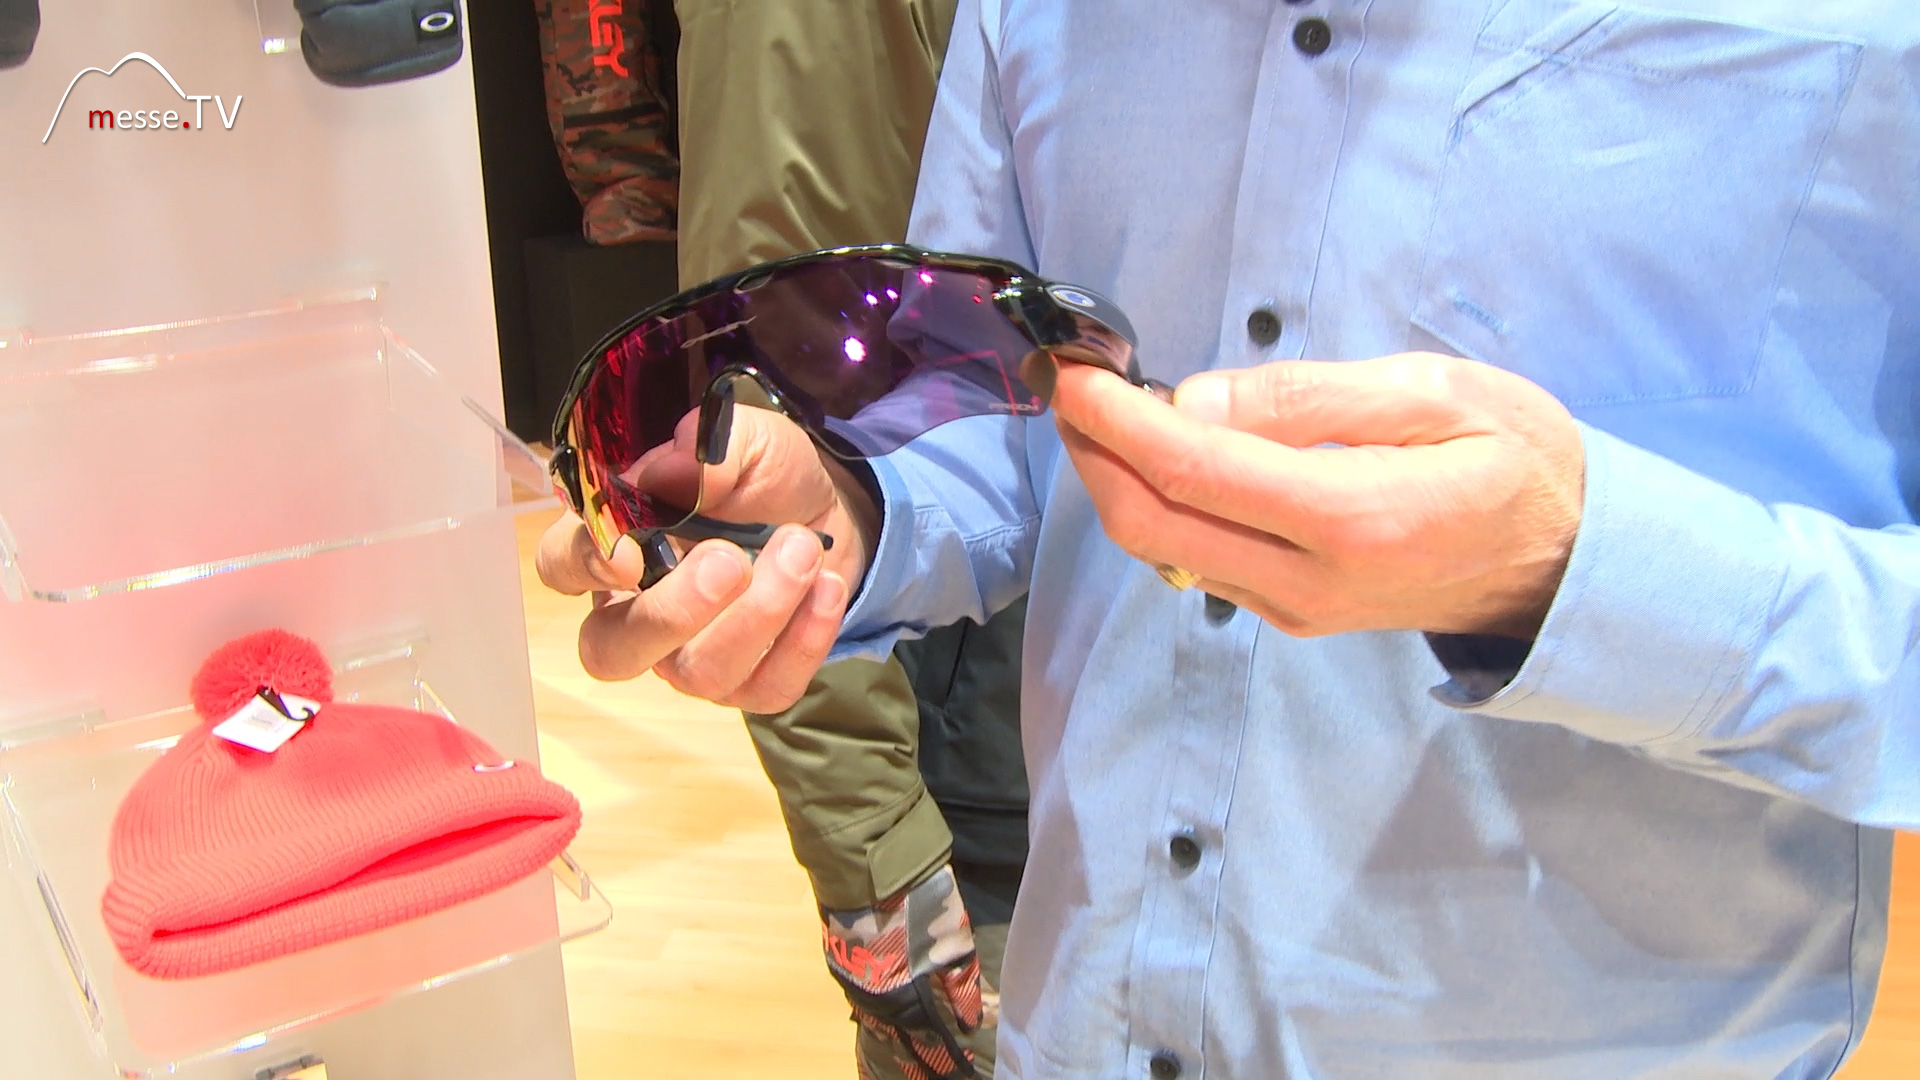 Oakley Smart Sunglasses Pace Display in the field of view Ispo 2017 Munich